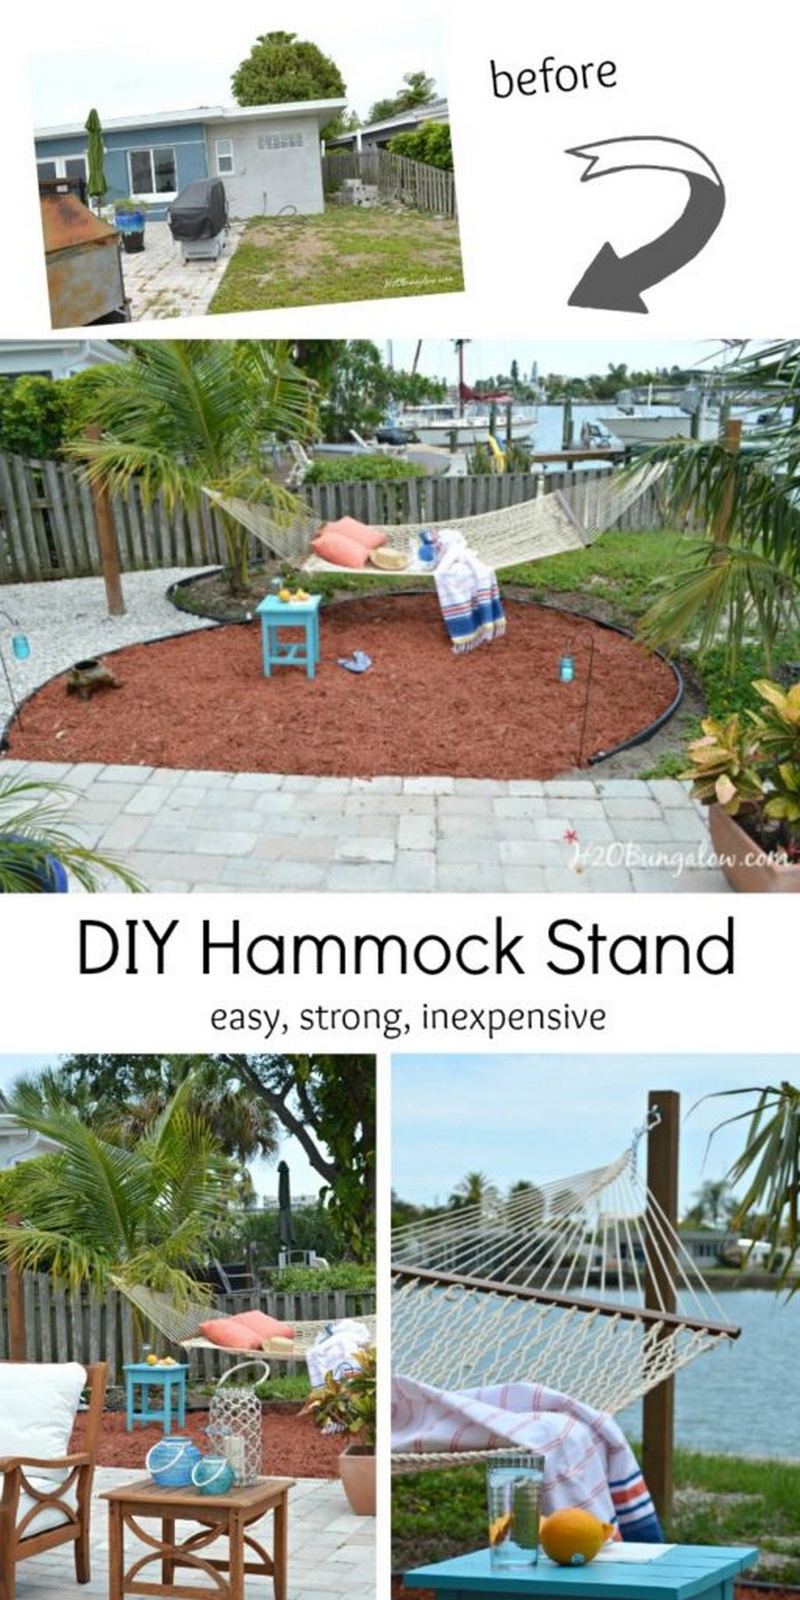 How to Build A DIY Hammock Stand From Posts